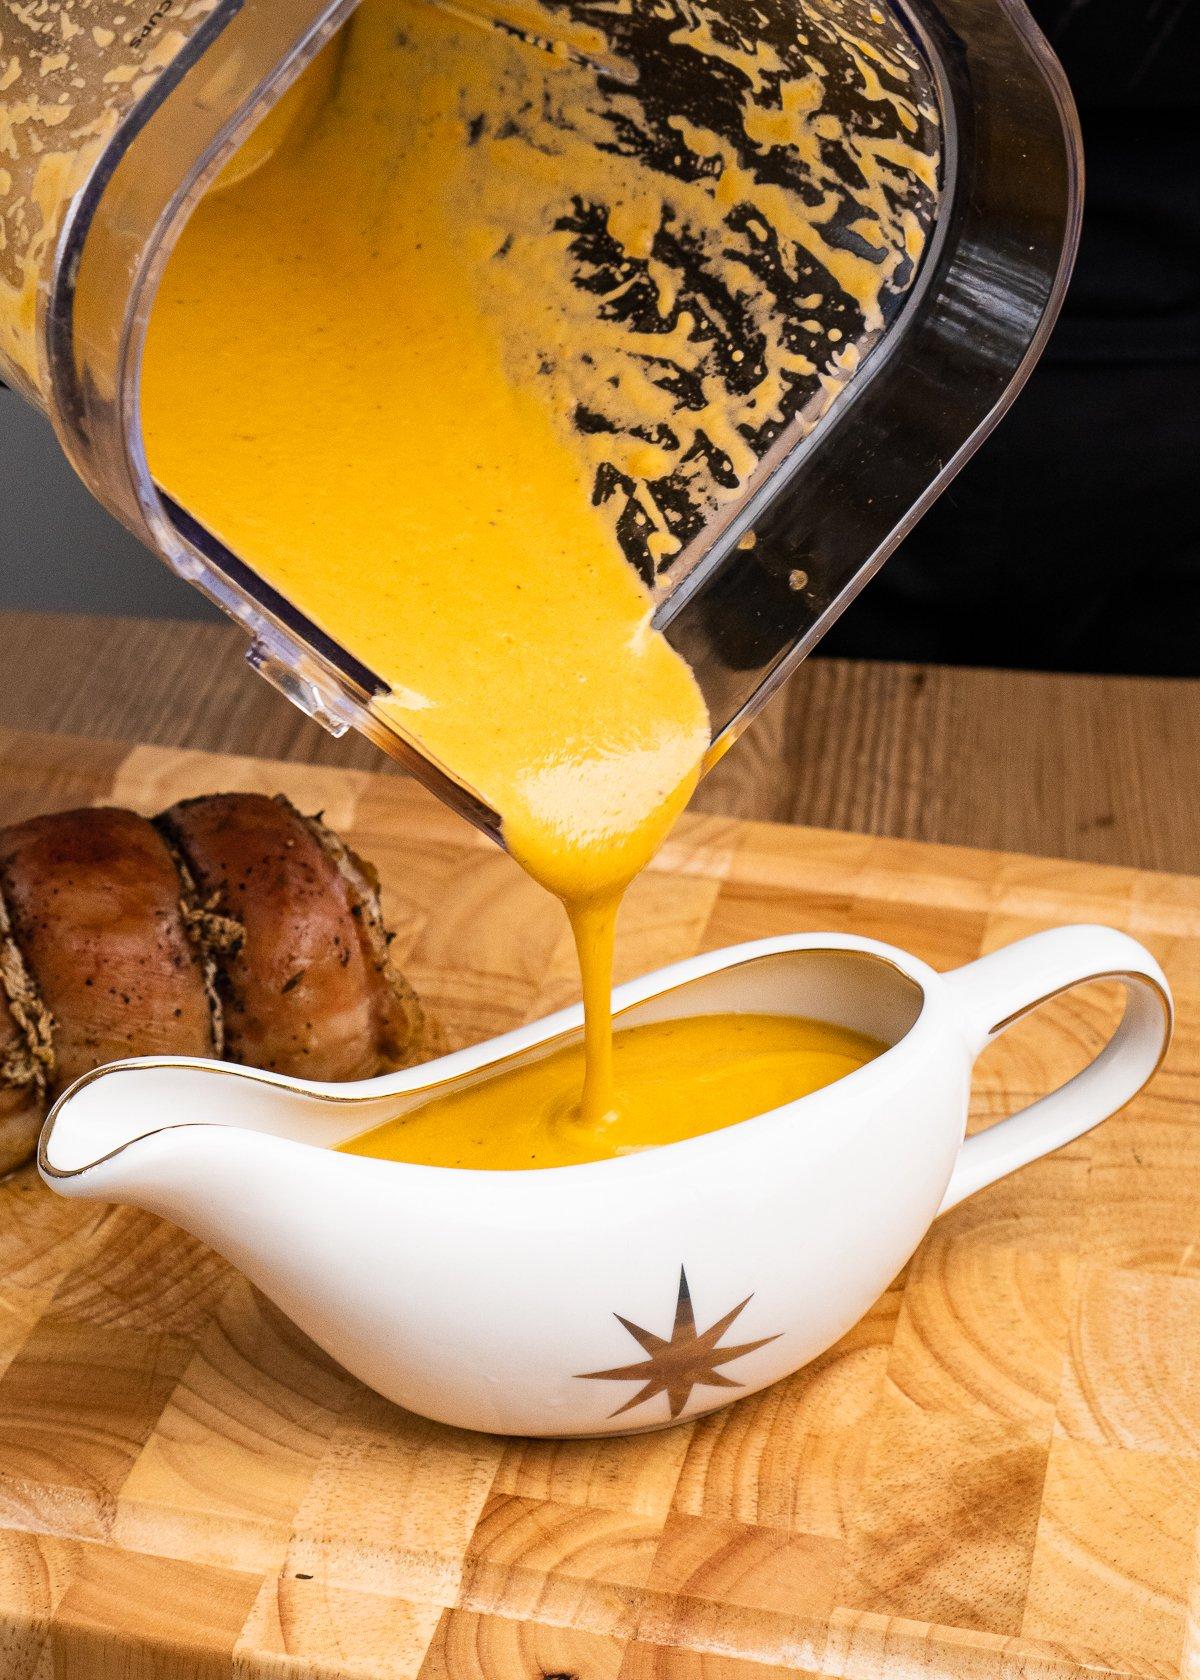 Lamb sauce being poured into a gravy boat from a blender with a lamb breast joint on a wooden chopping board